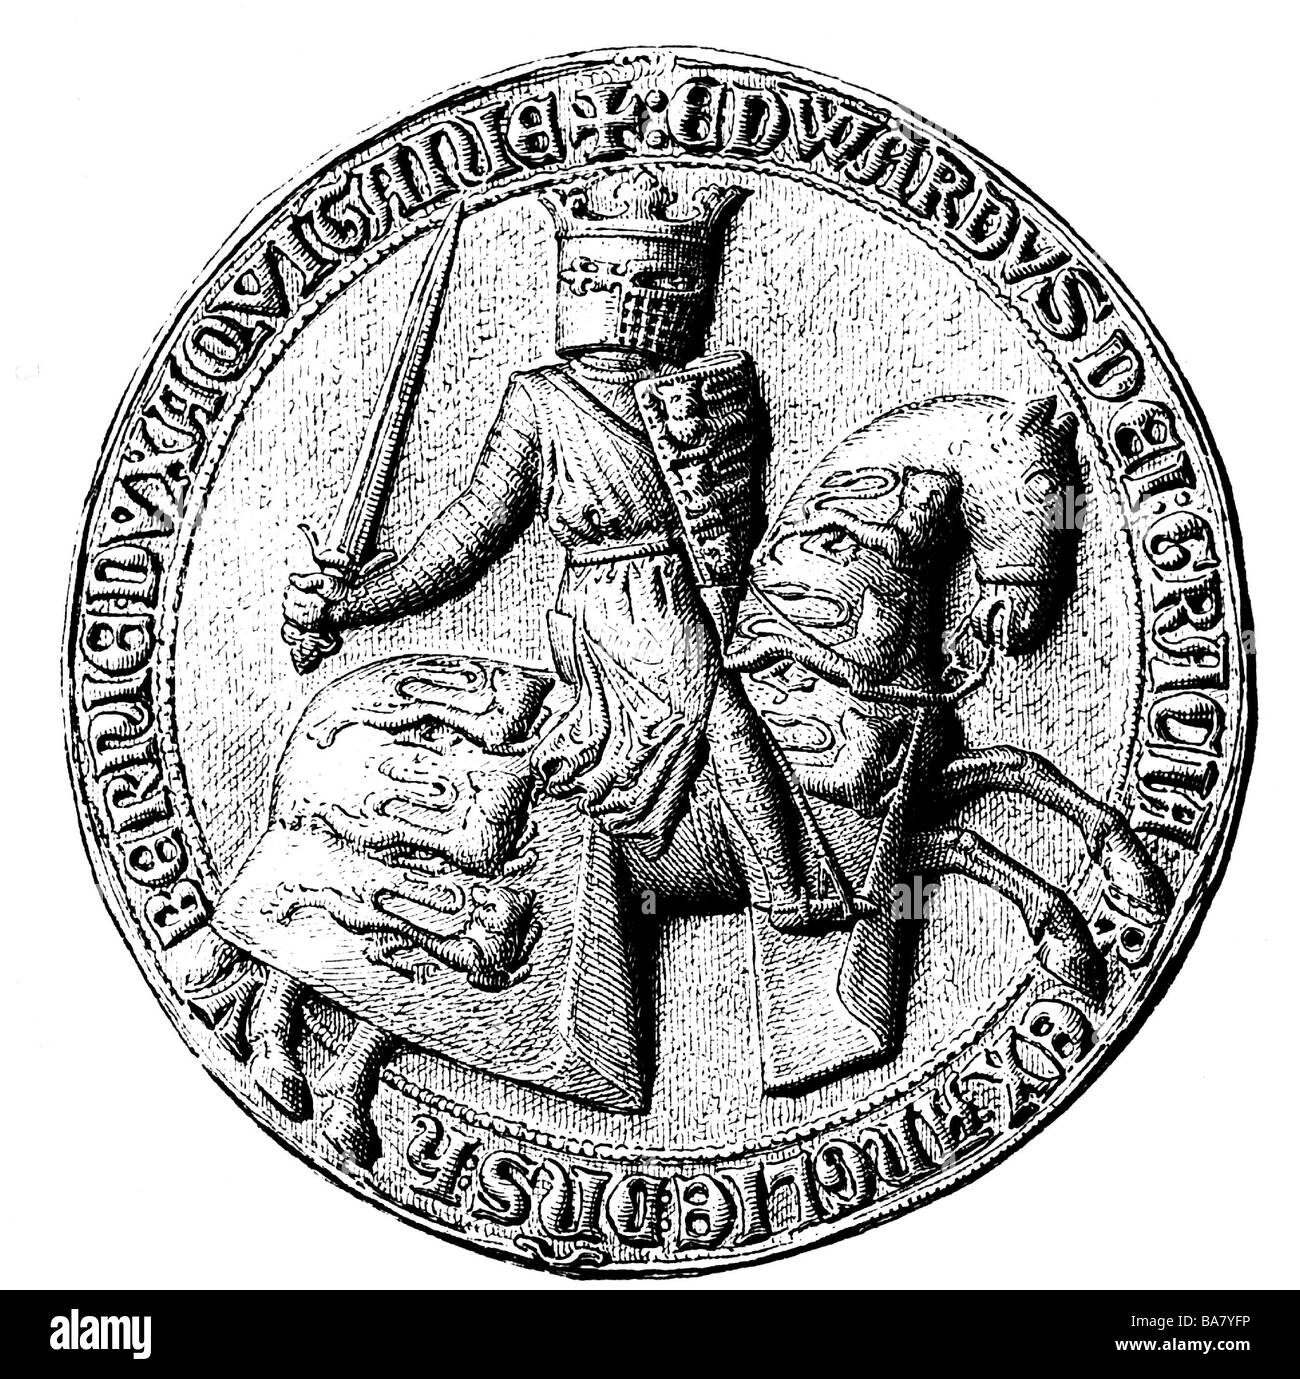 Edward I ("Longshanks"), 17.6.1239 - 7.7.1307, King of England since 20.11.1272, full length, riding, drawing after seal, Stock Photo